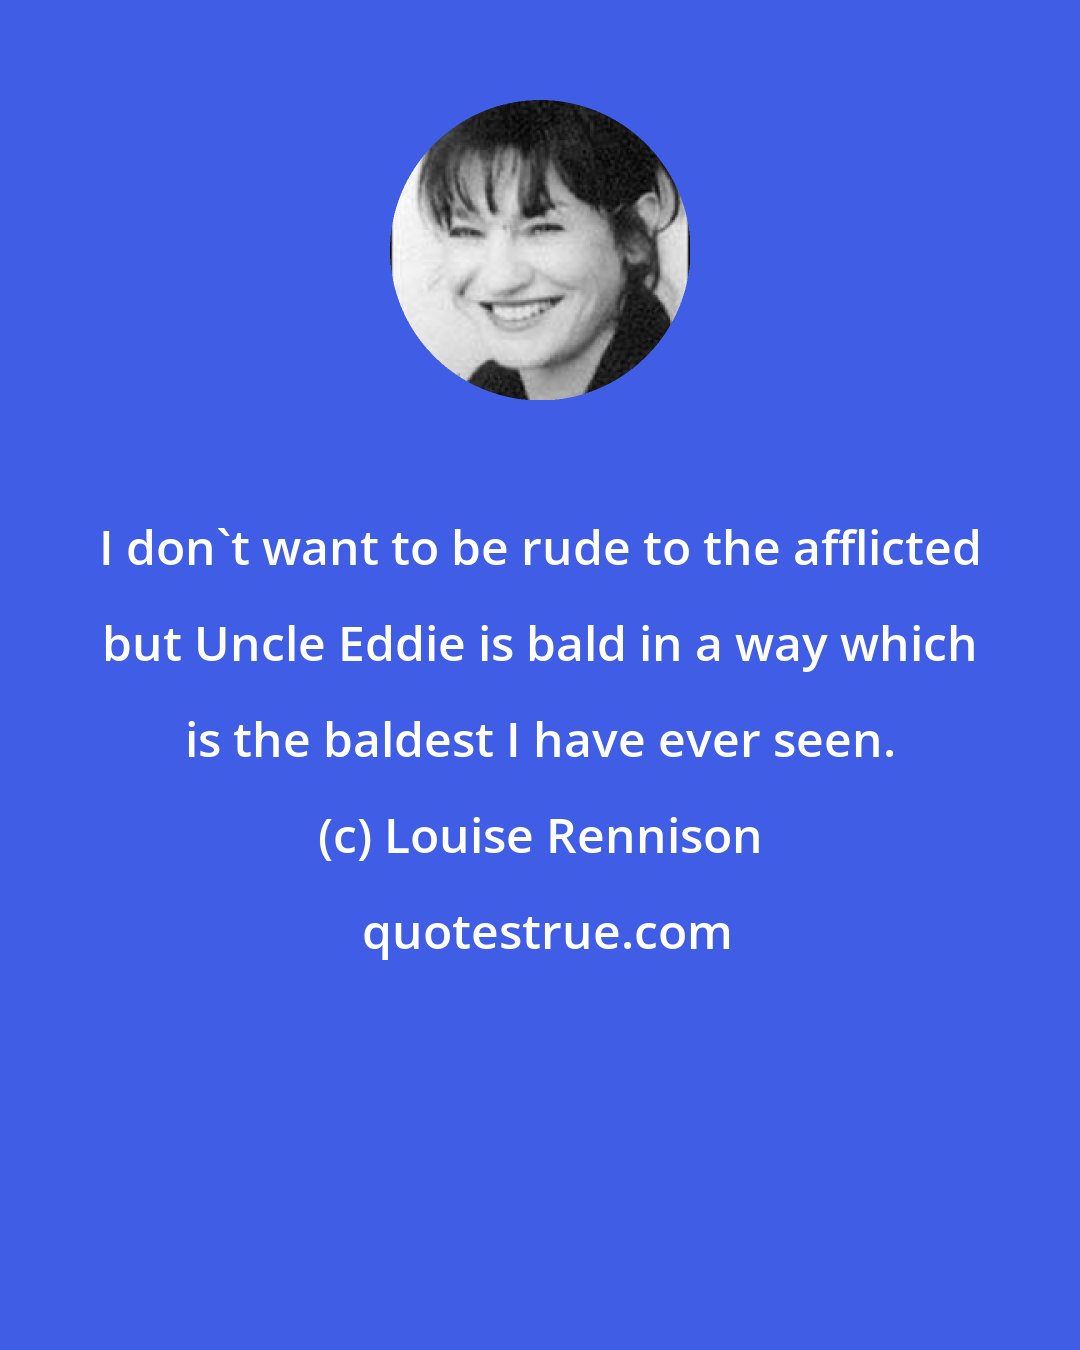 Louise Rennison: I don't want to be rude to the afflicted but Uncle Eddie is bald in a way which is the baldest I have ever seen.